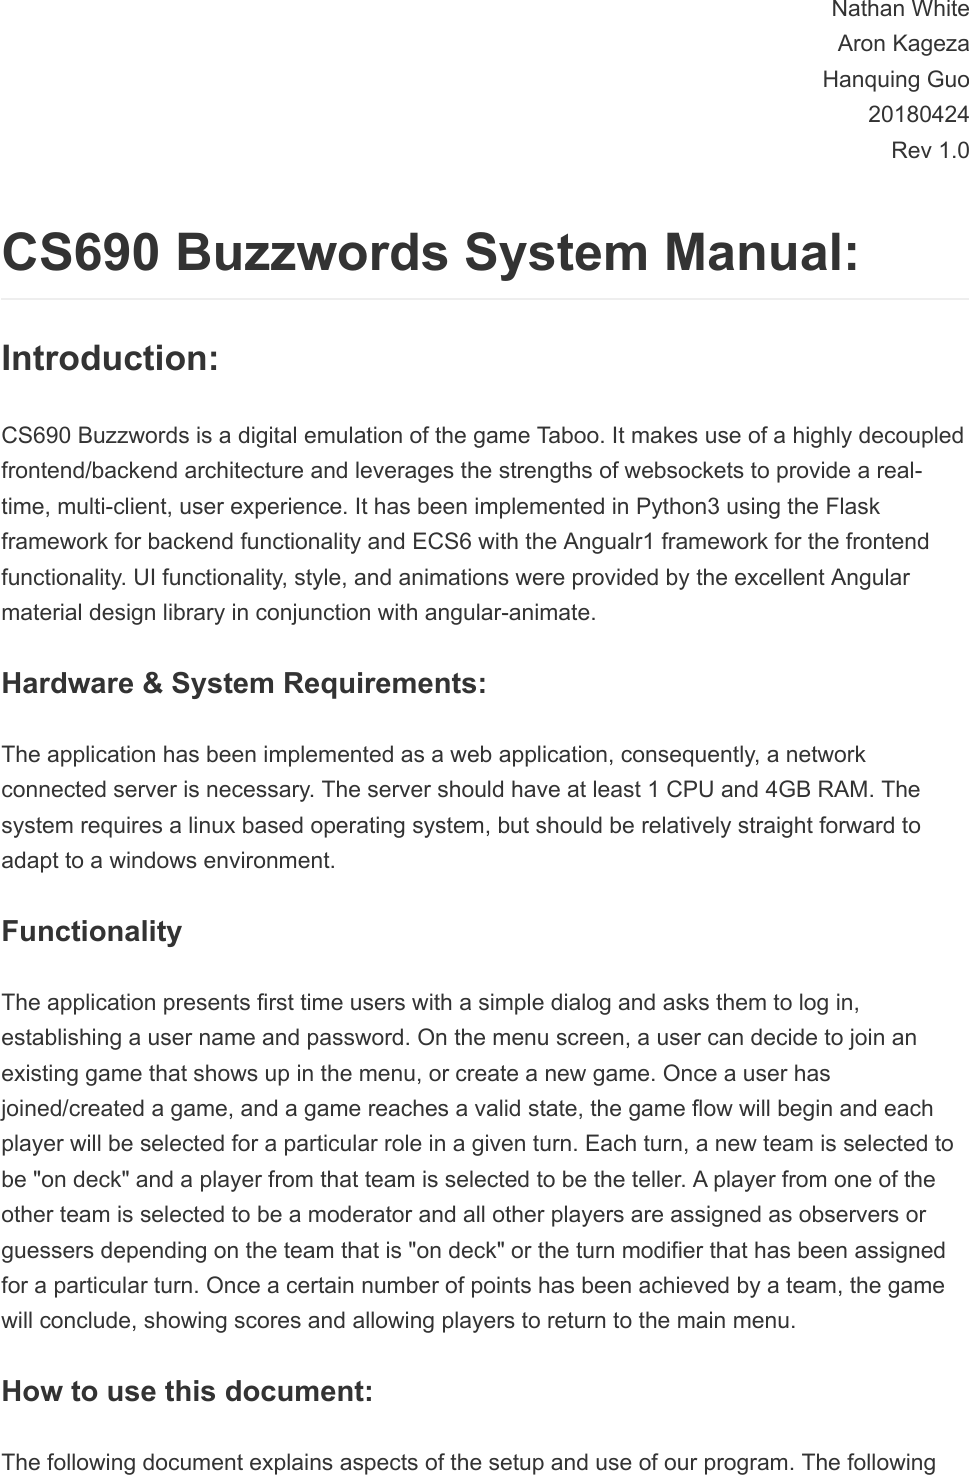 Page 1 of 5 - System Manual